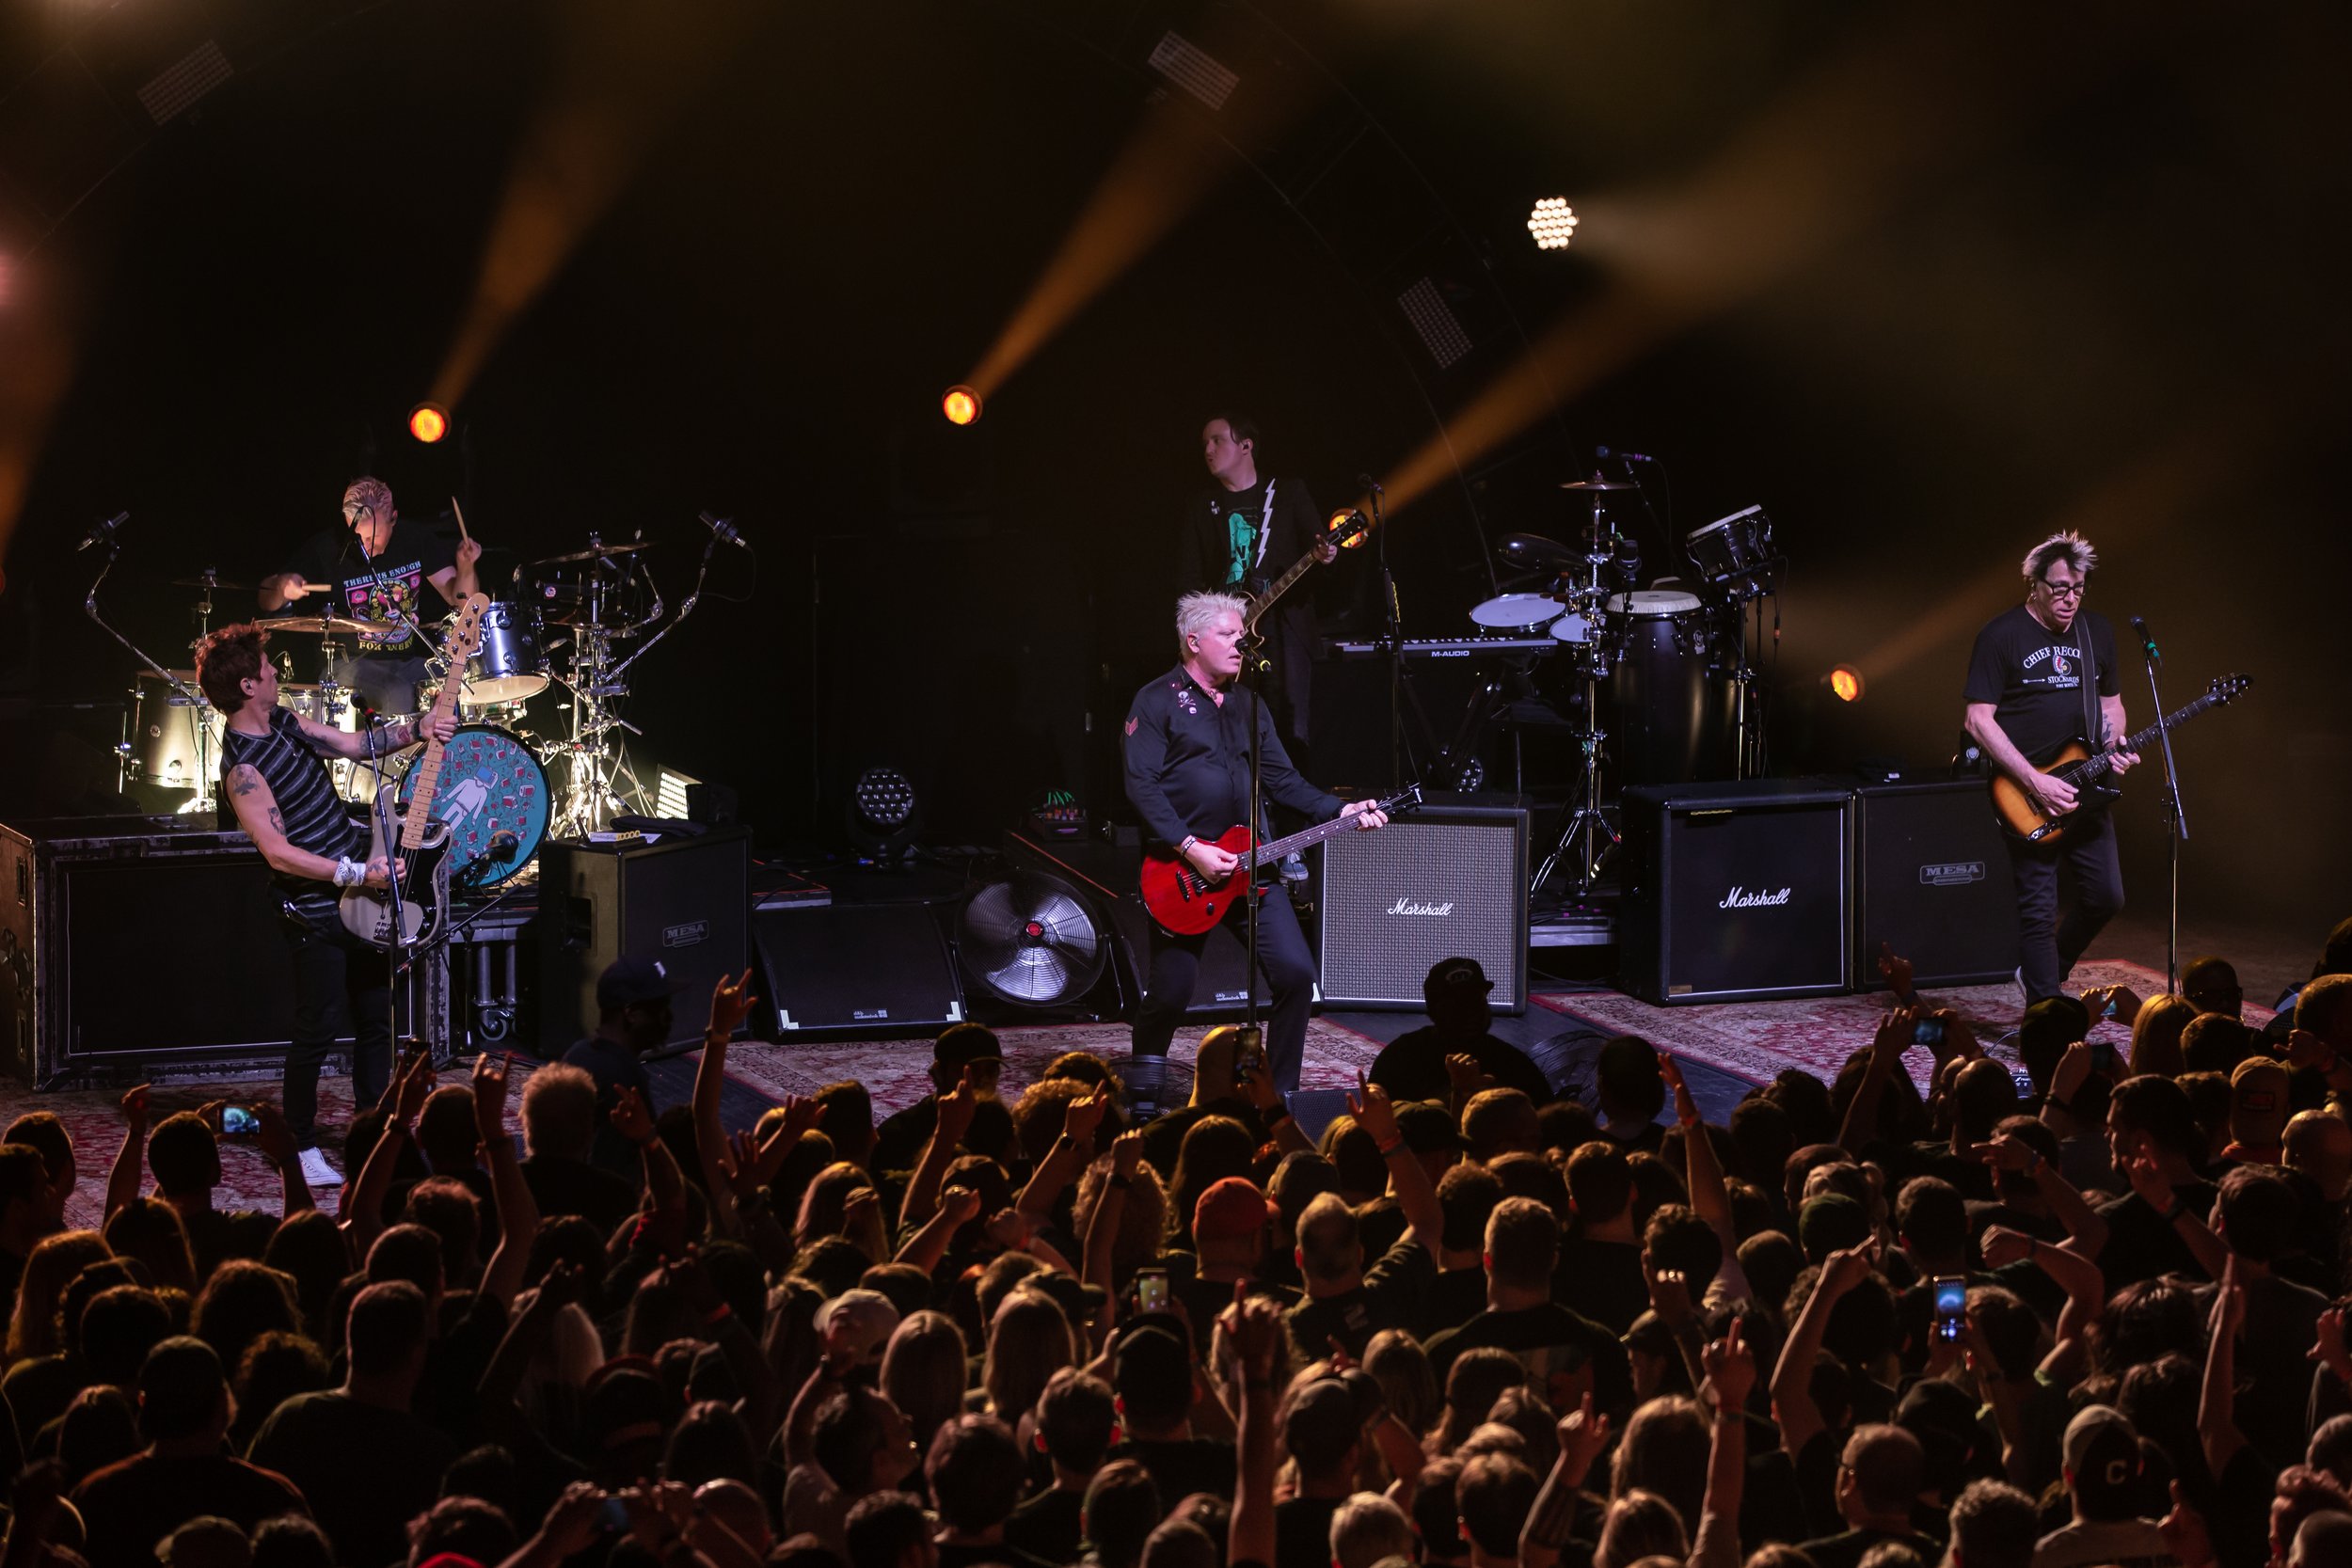    The Offspring   // 2022-05-20 //   The Fillmore      - Detroit, MI // Photos by   Joe Alcodray   